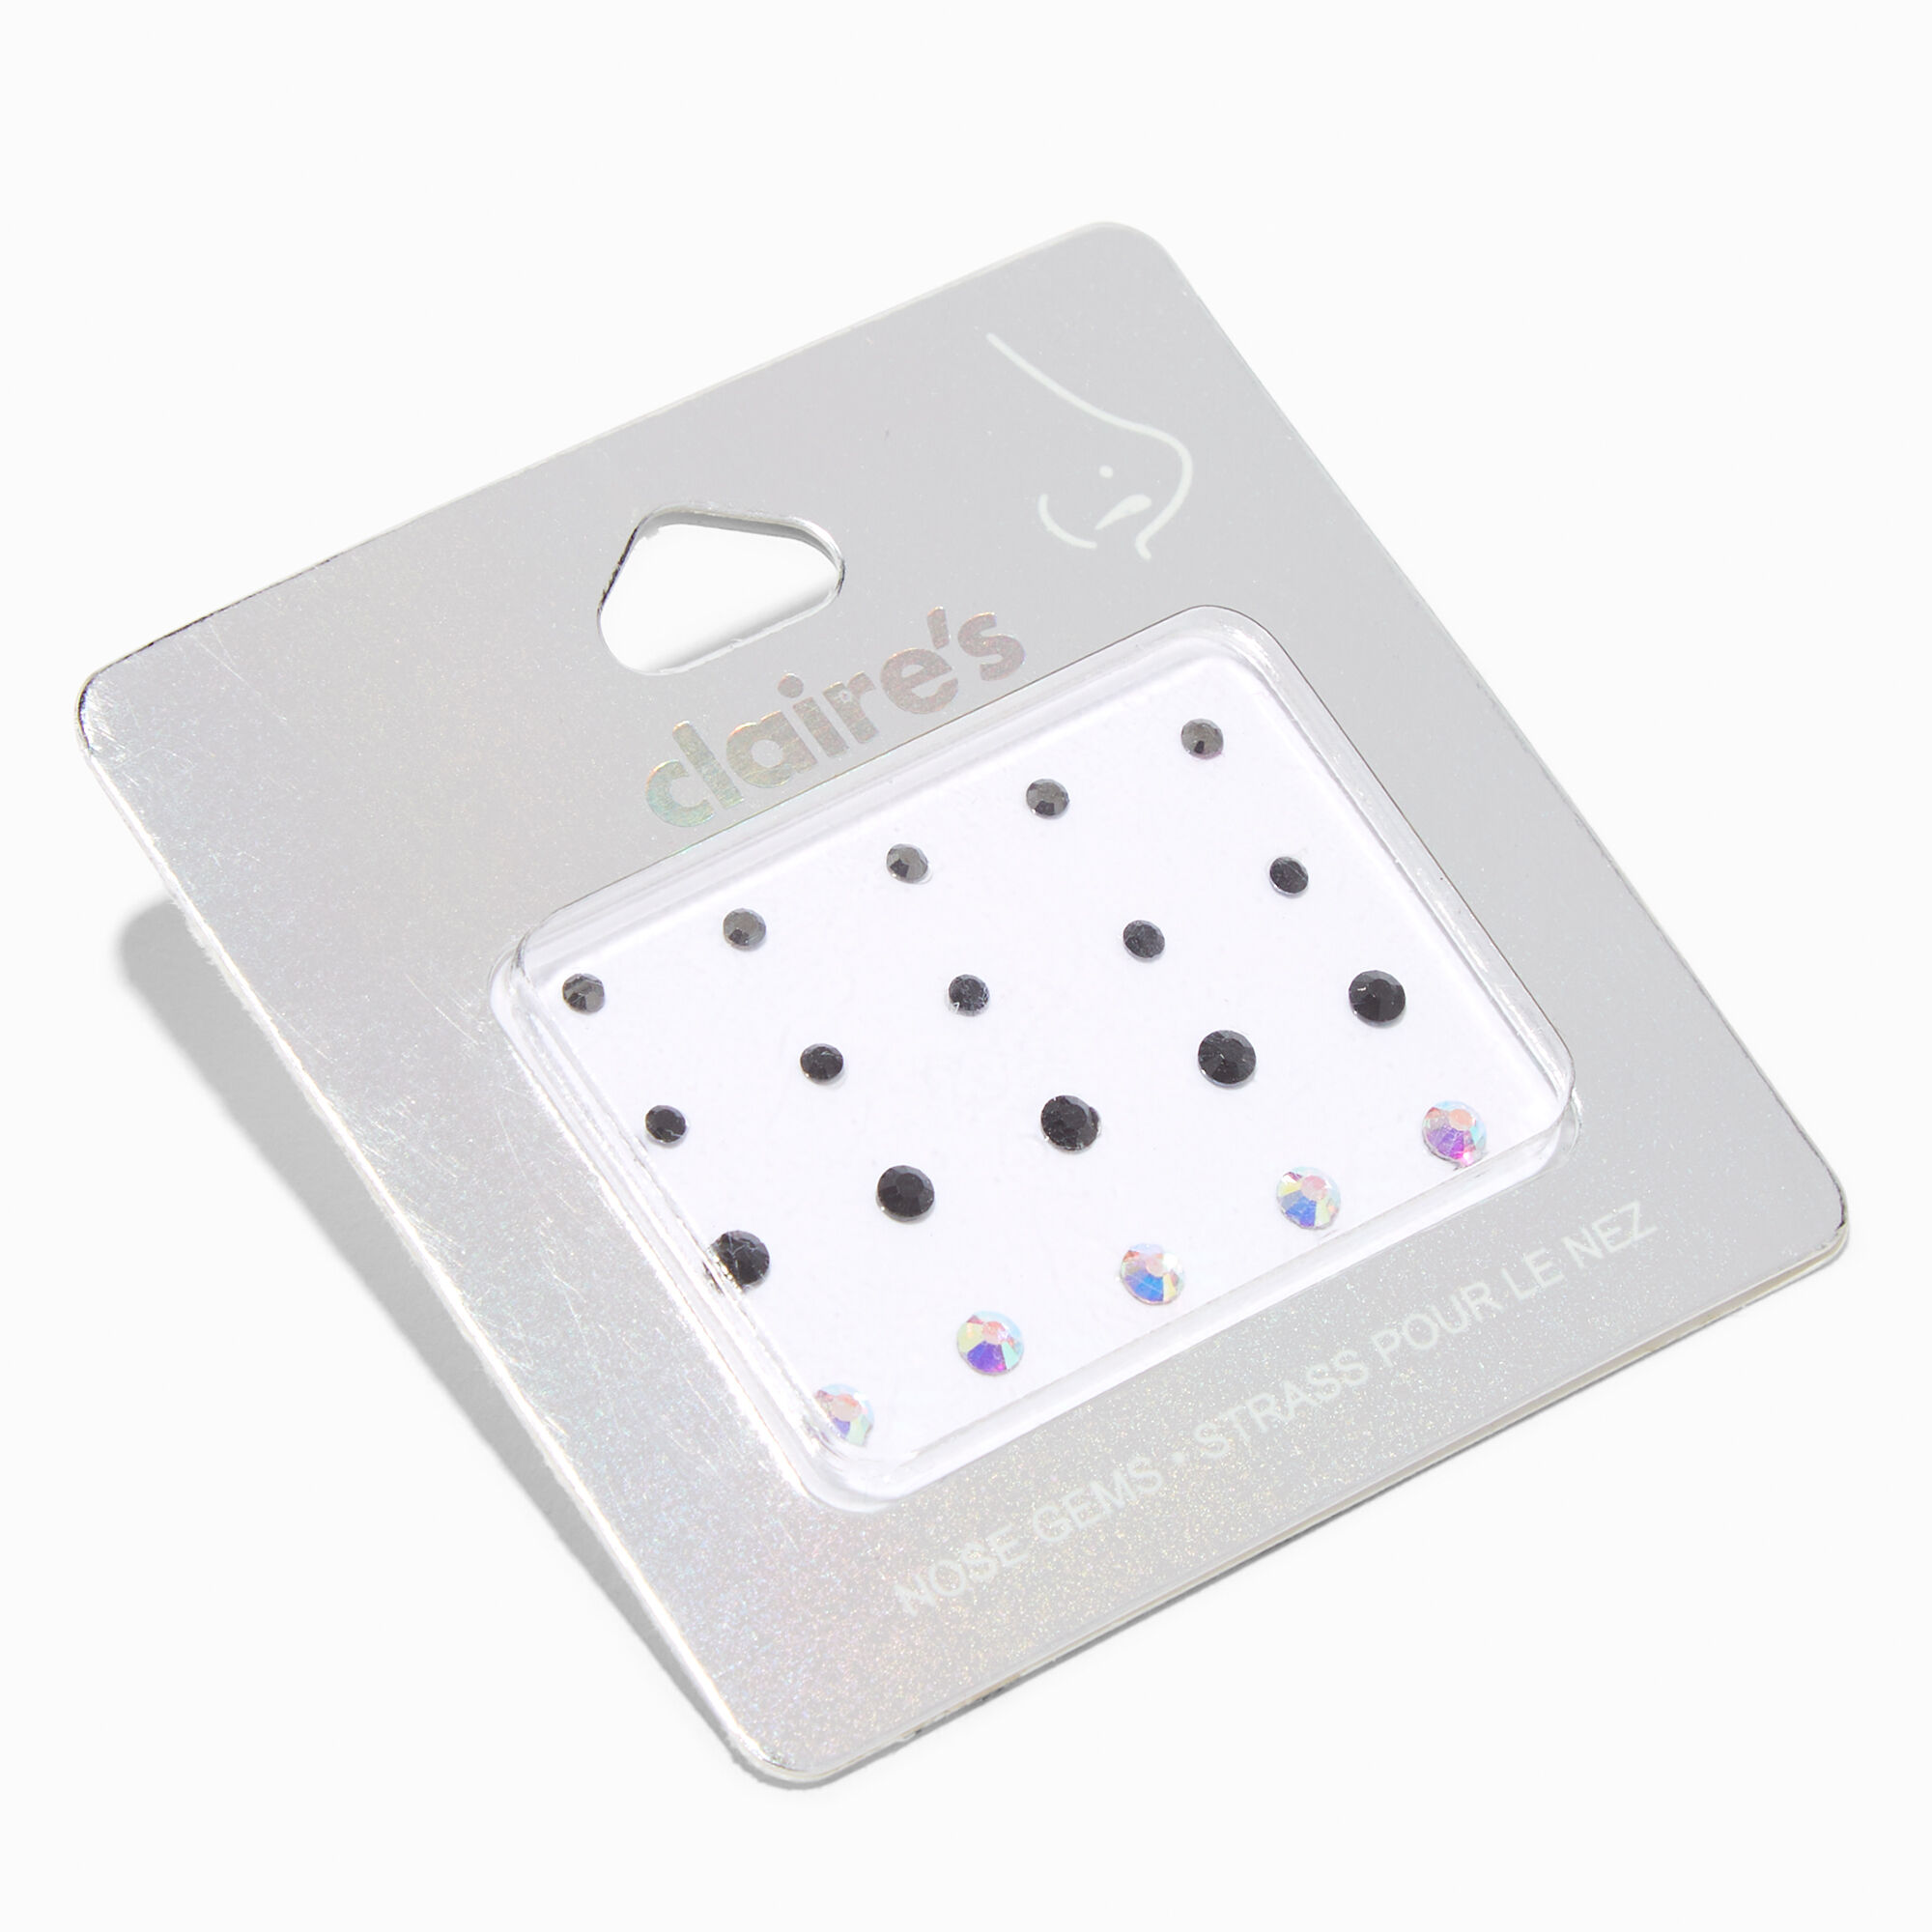 View Claires Nose Gems 20 Pack Black information